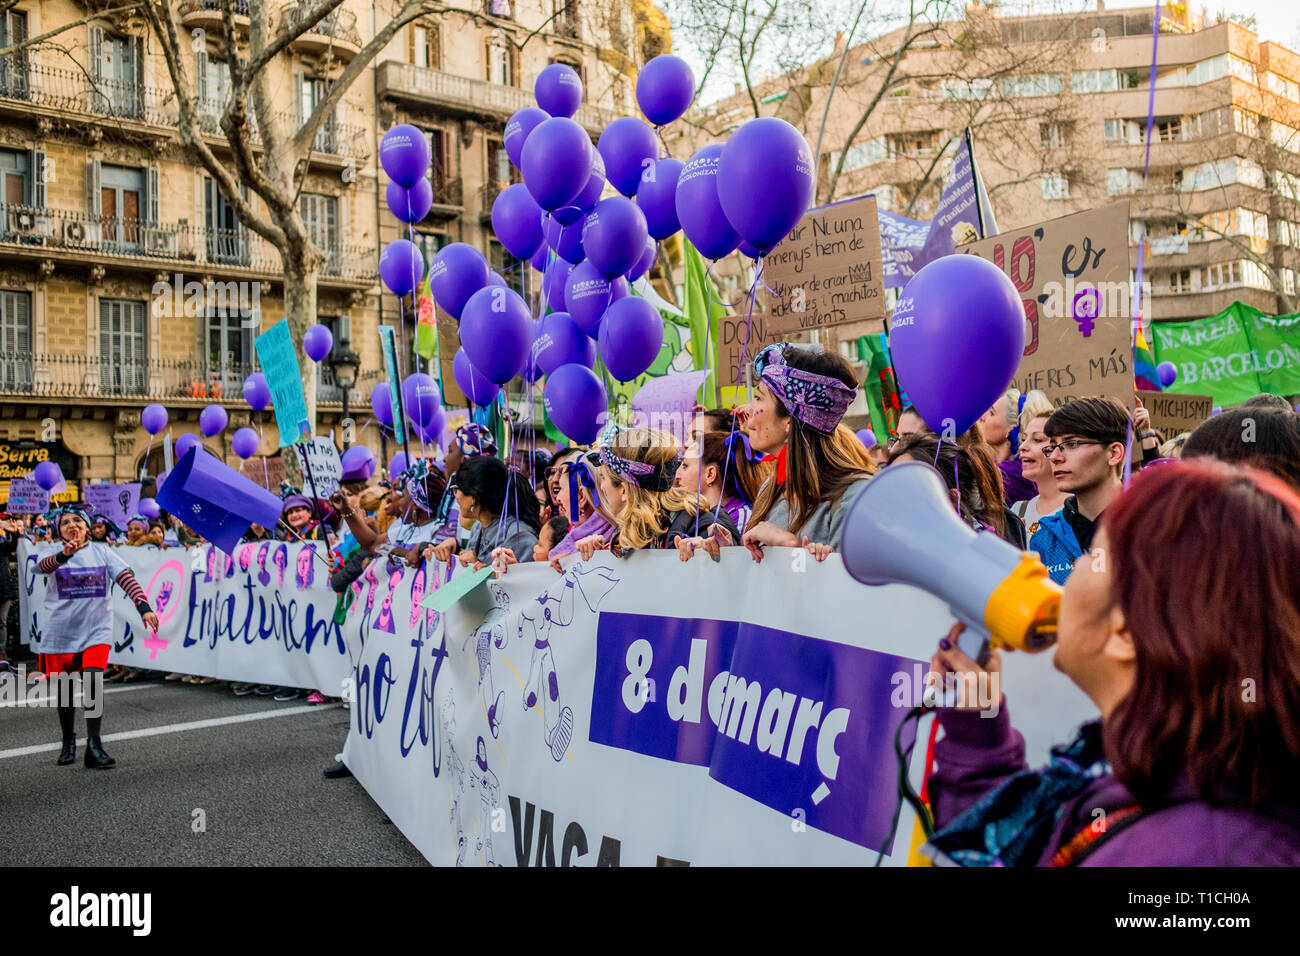 Barcelona, Spain - 8 march 2019:  women chanting and calpping in the city during woman's day with purple balloons Stock Photo